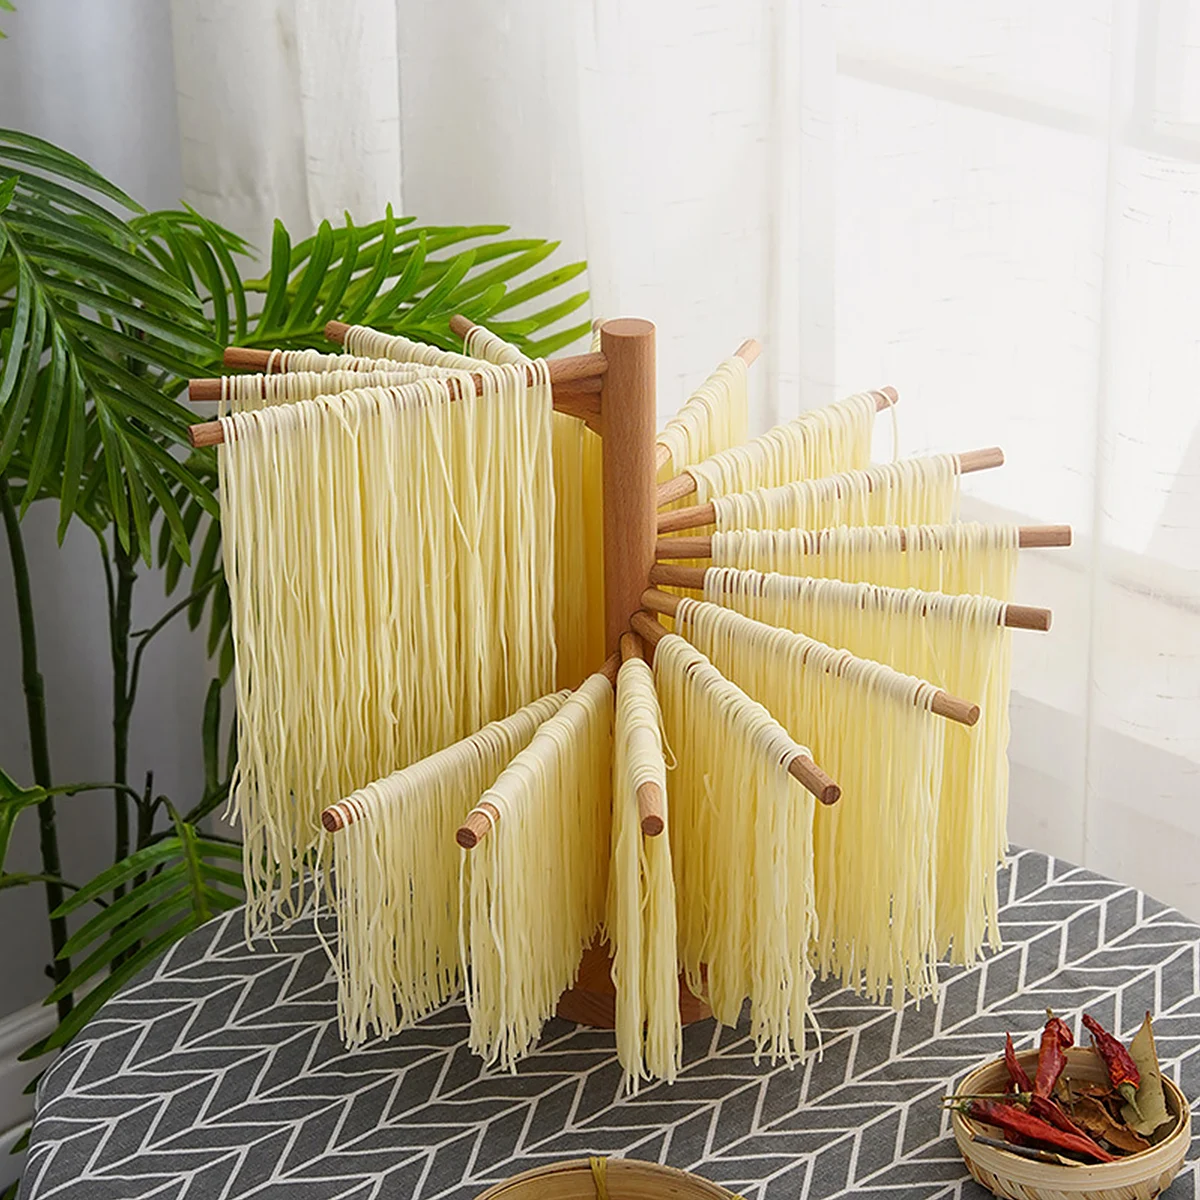 https://ae01.alicdn.com/kf/Sd7fc2f776ea24a249968bac372d39854O/Collapsible-Pasta-Drying-Rack-Wooden-Spaghetti-Stand-Dryer-with-16-Suspension-Rods-Homemade-Fresh-Noodle-Hanger.jpg